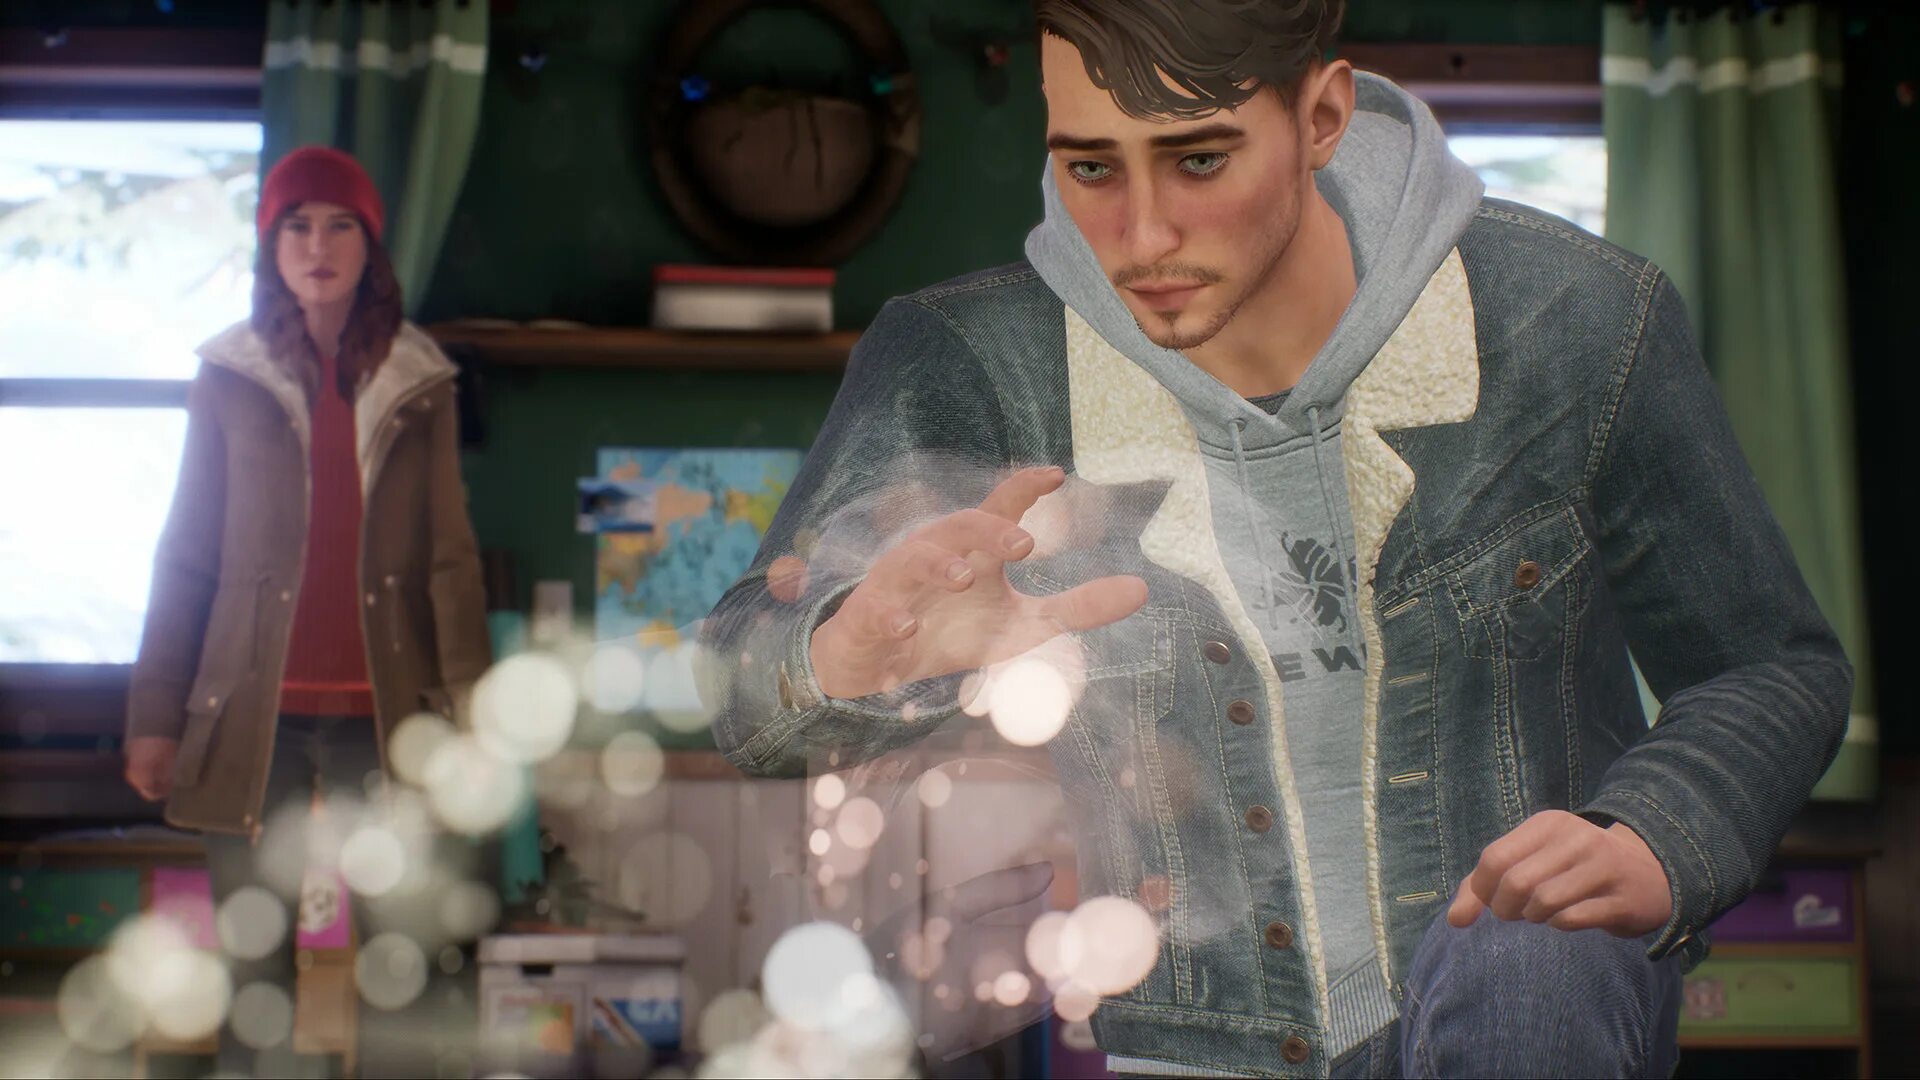 Tell my why игра. Tell me why игра Dontnod. Tell me why (2020). Tell me yet